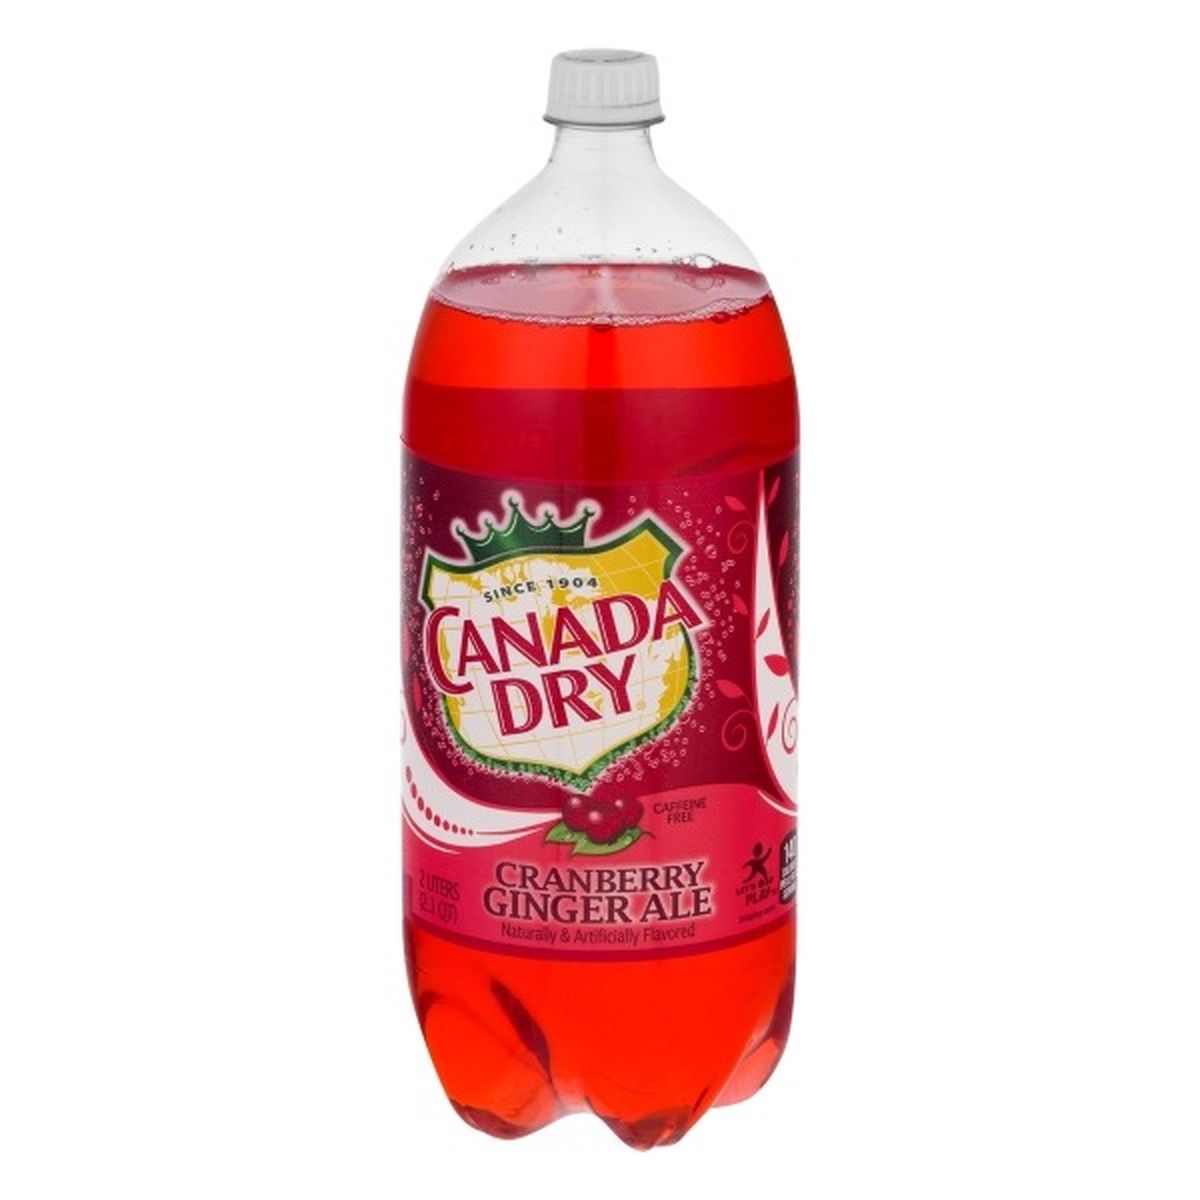 Calories in Canada Dry Ginger Ale, Cranberry